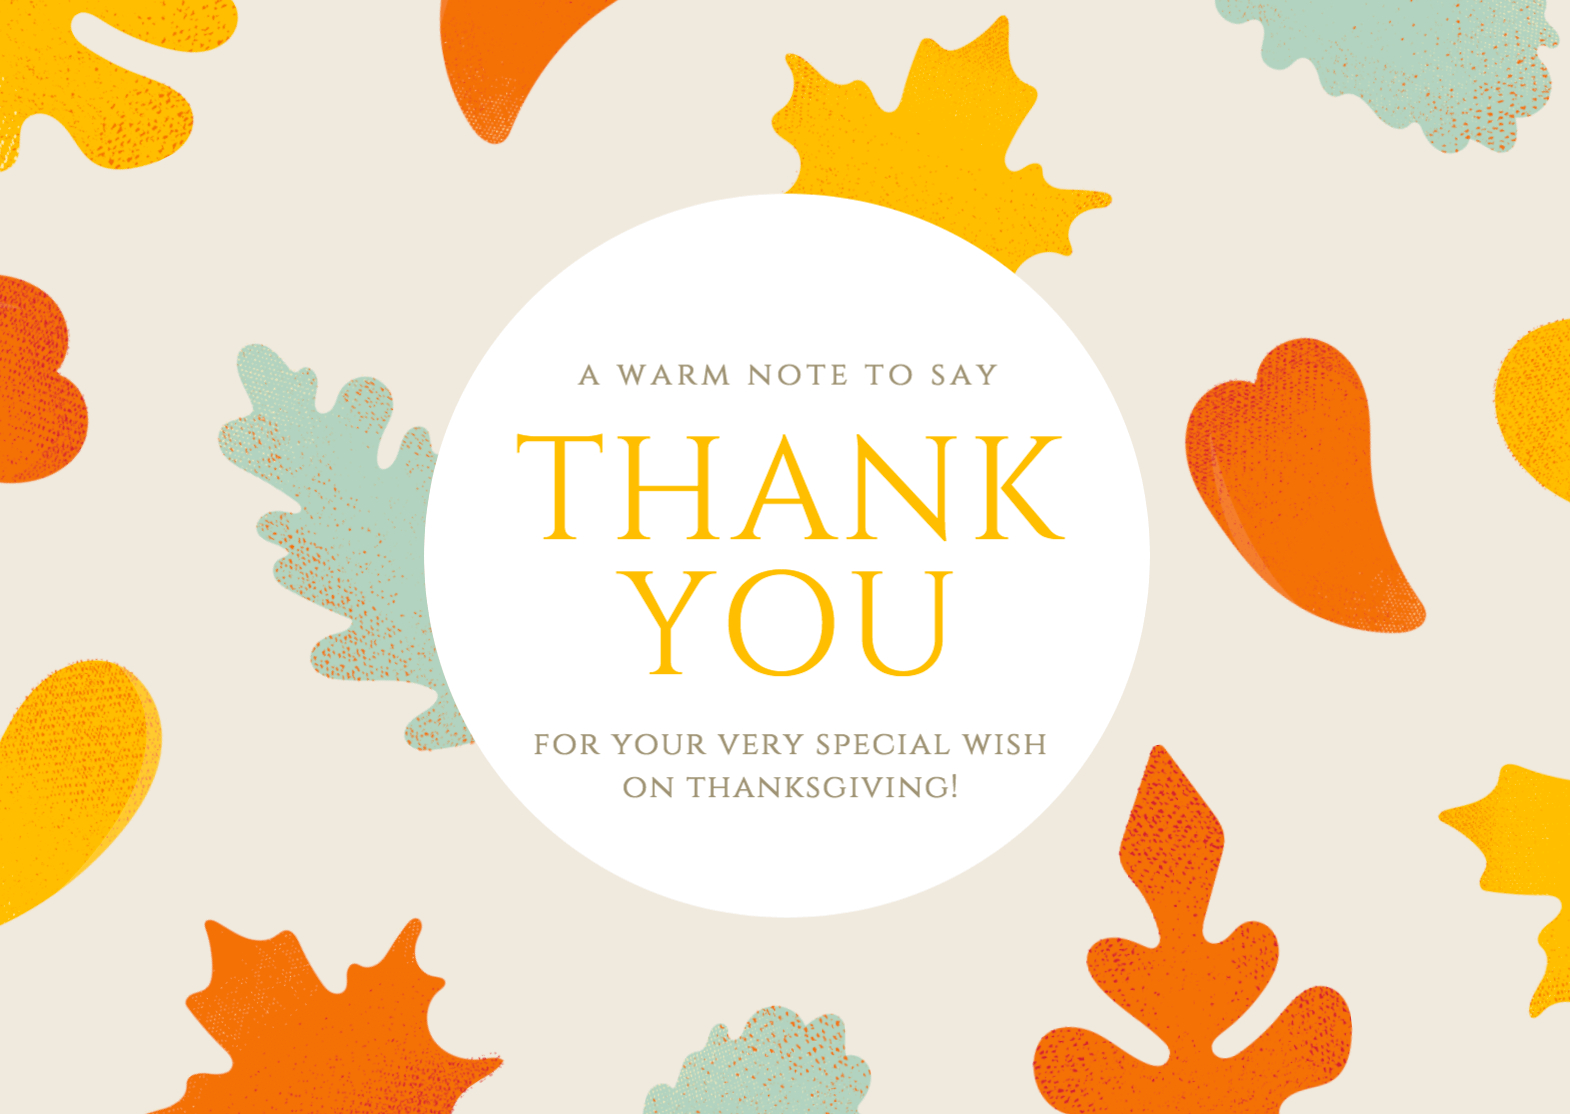 Free Thank You Card Maker - Canva - Free Personalized Thank You Cards Printable